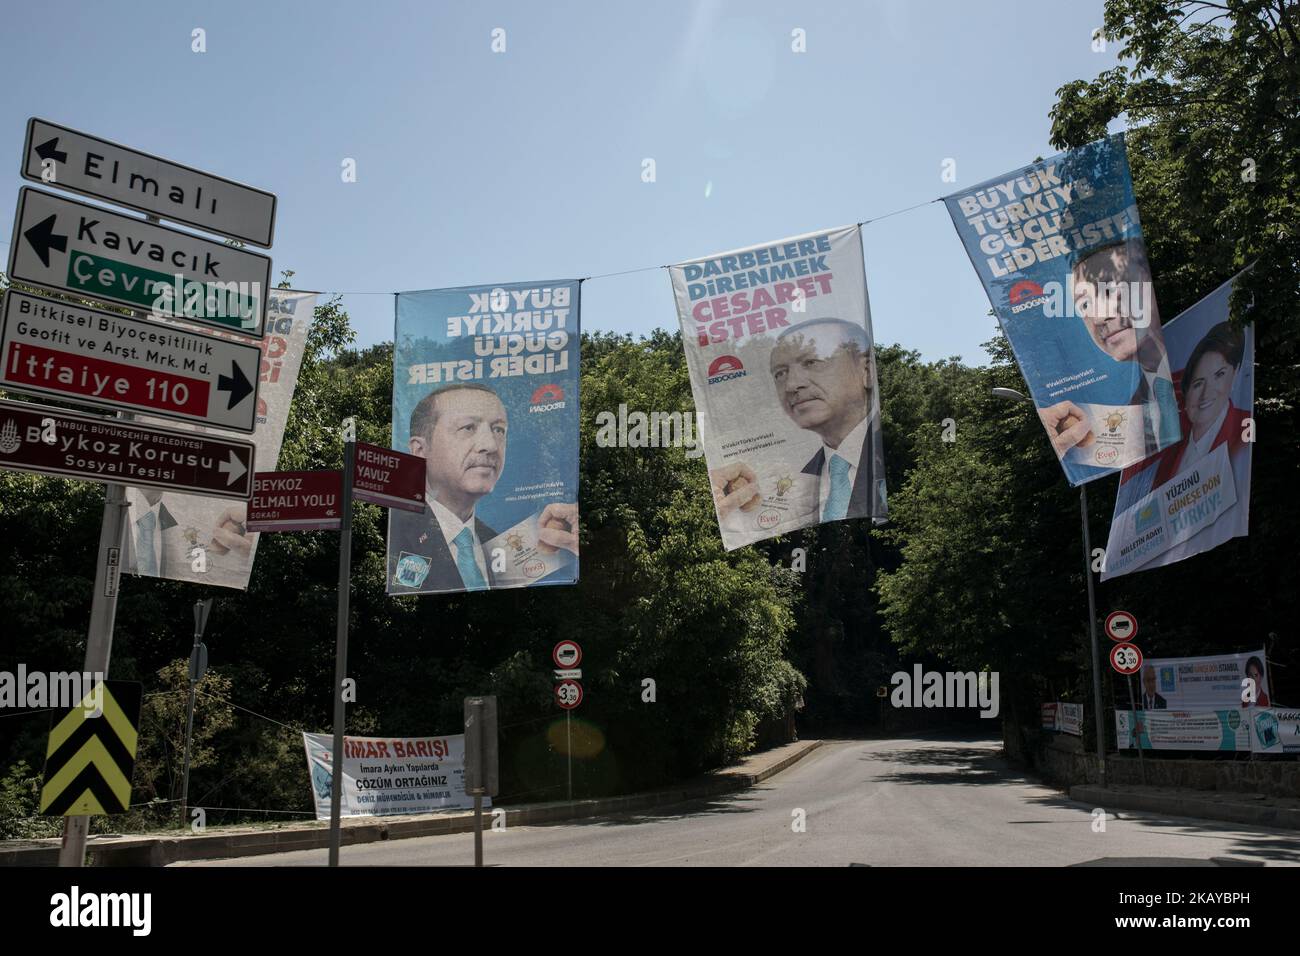 Few days left for the general elections in Turkey, the candidates keep on doing their campaigns. In many different parts of Istanbul ranging from rural areas to the crowded central areas, large posters of the current president, Erdogan are hanging. (Photo by Erhan Demirtas/NurPhoto) Stock Photo